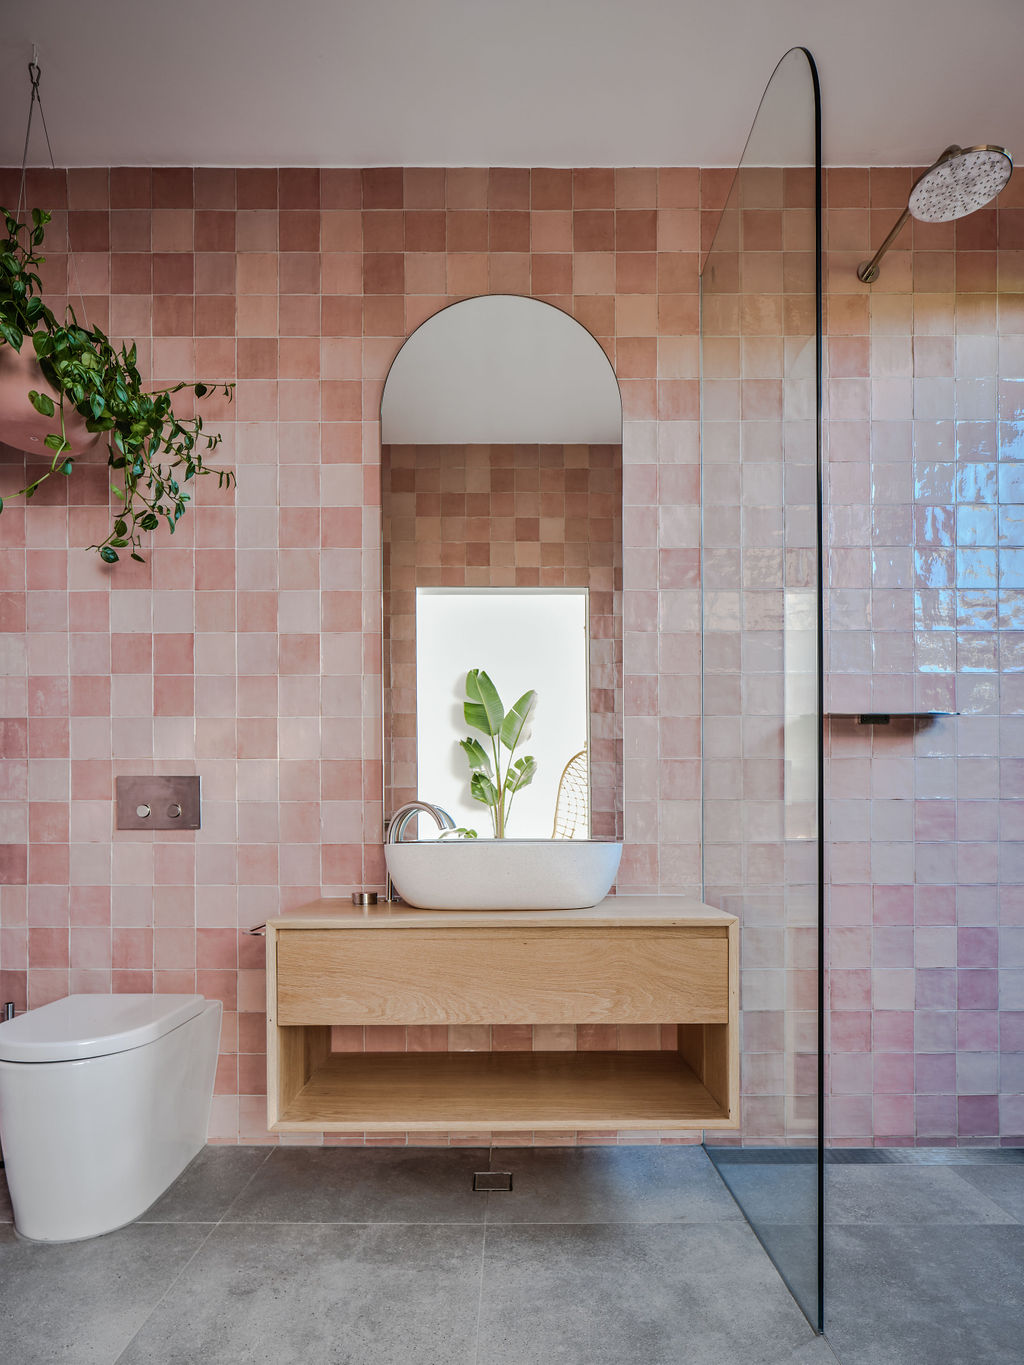 Bathrooms that don't use white tiles Fabulous gallery of bathrooms